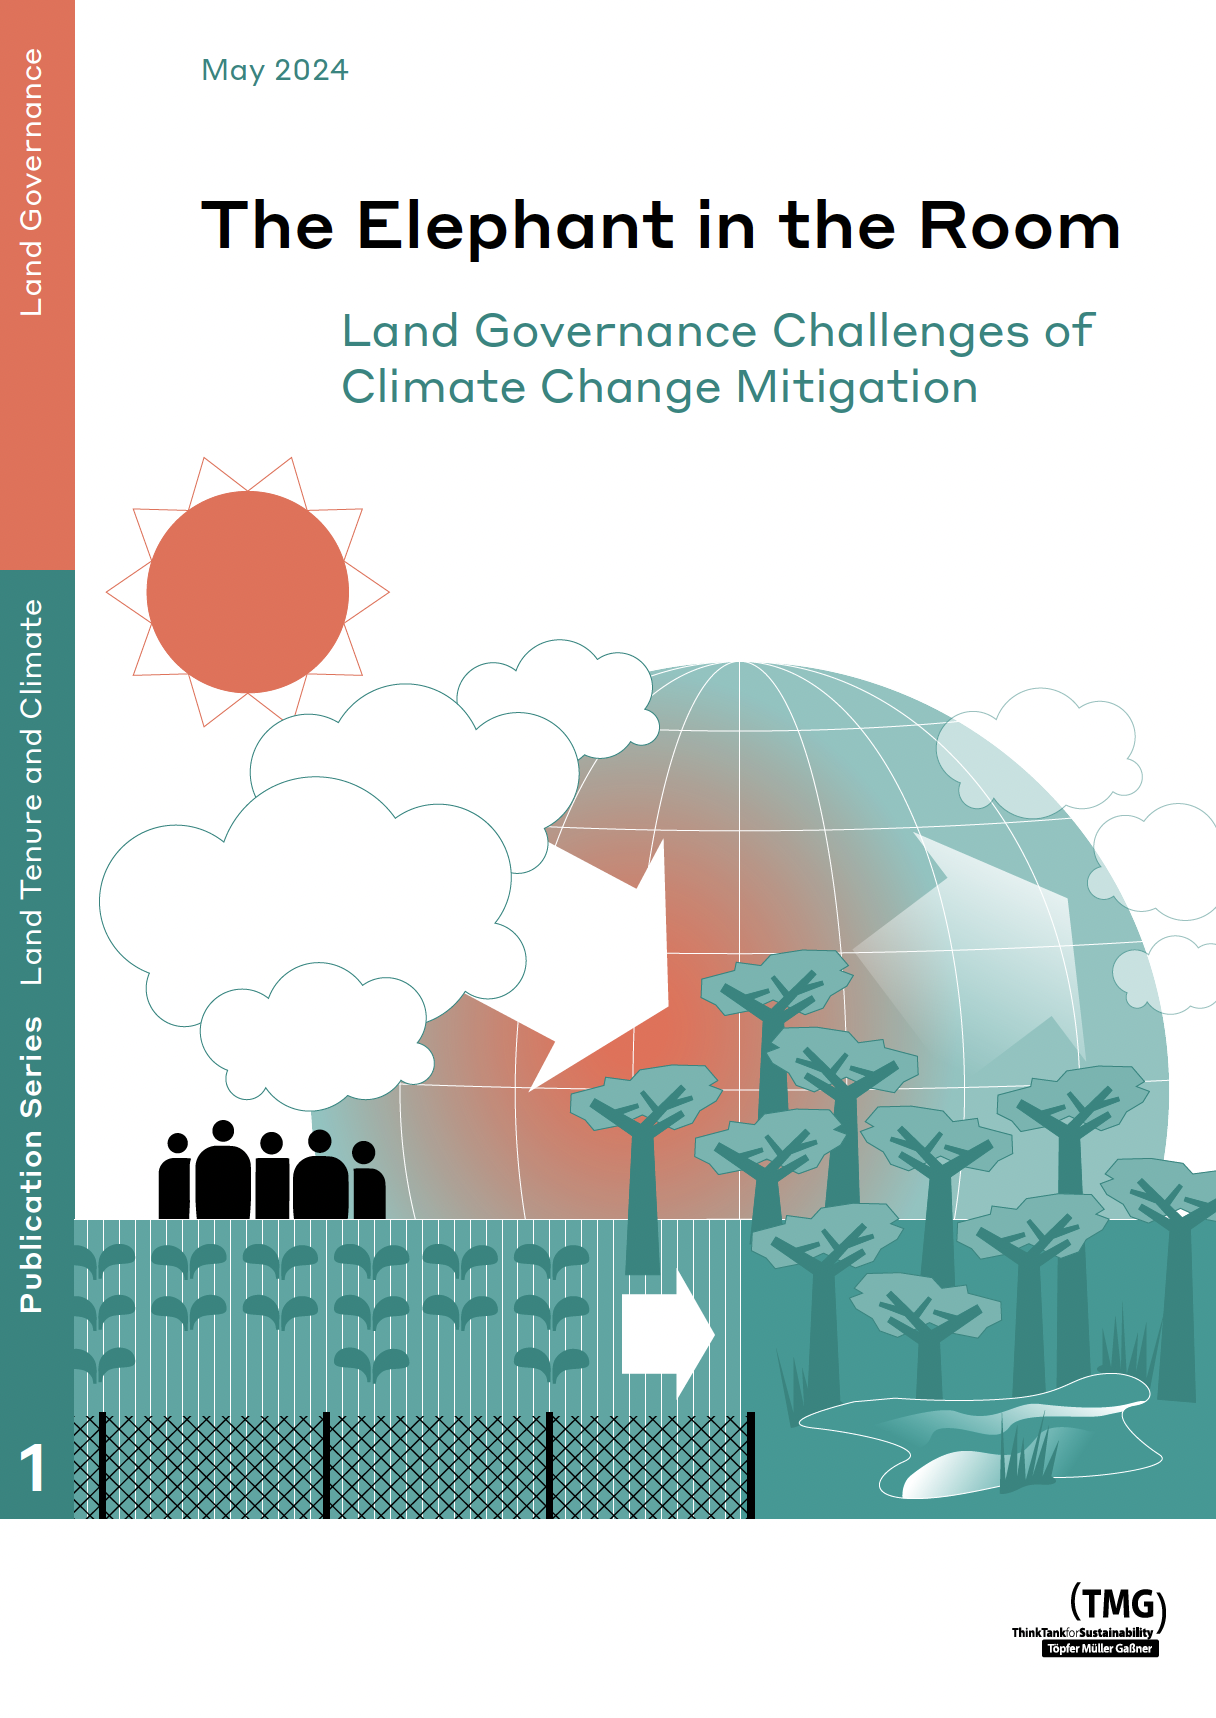 The Elephant in the Room. Land Governance Challenges of Climate Change Mitigation